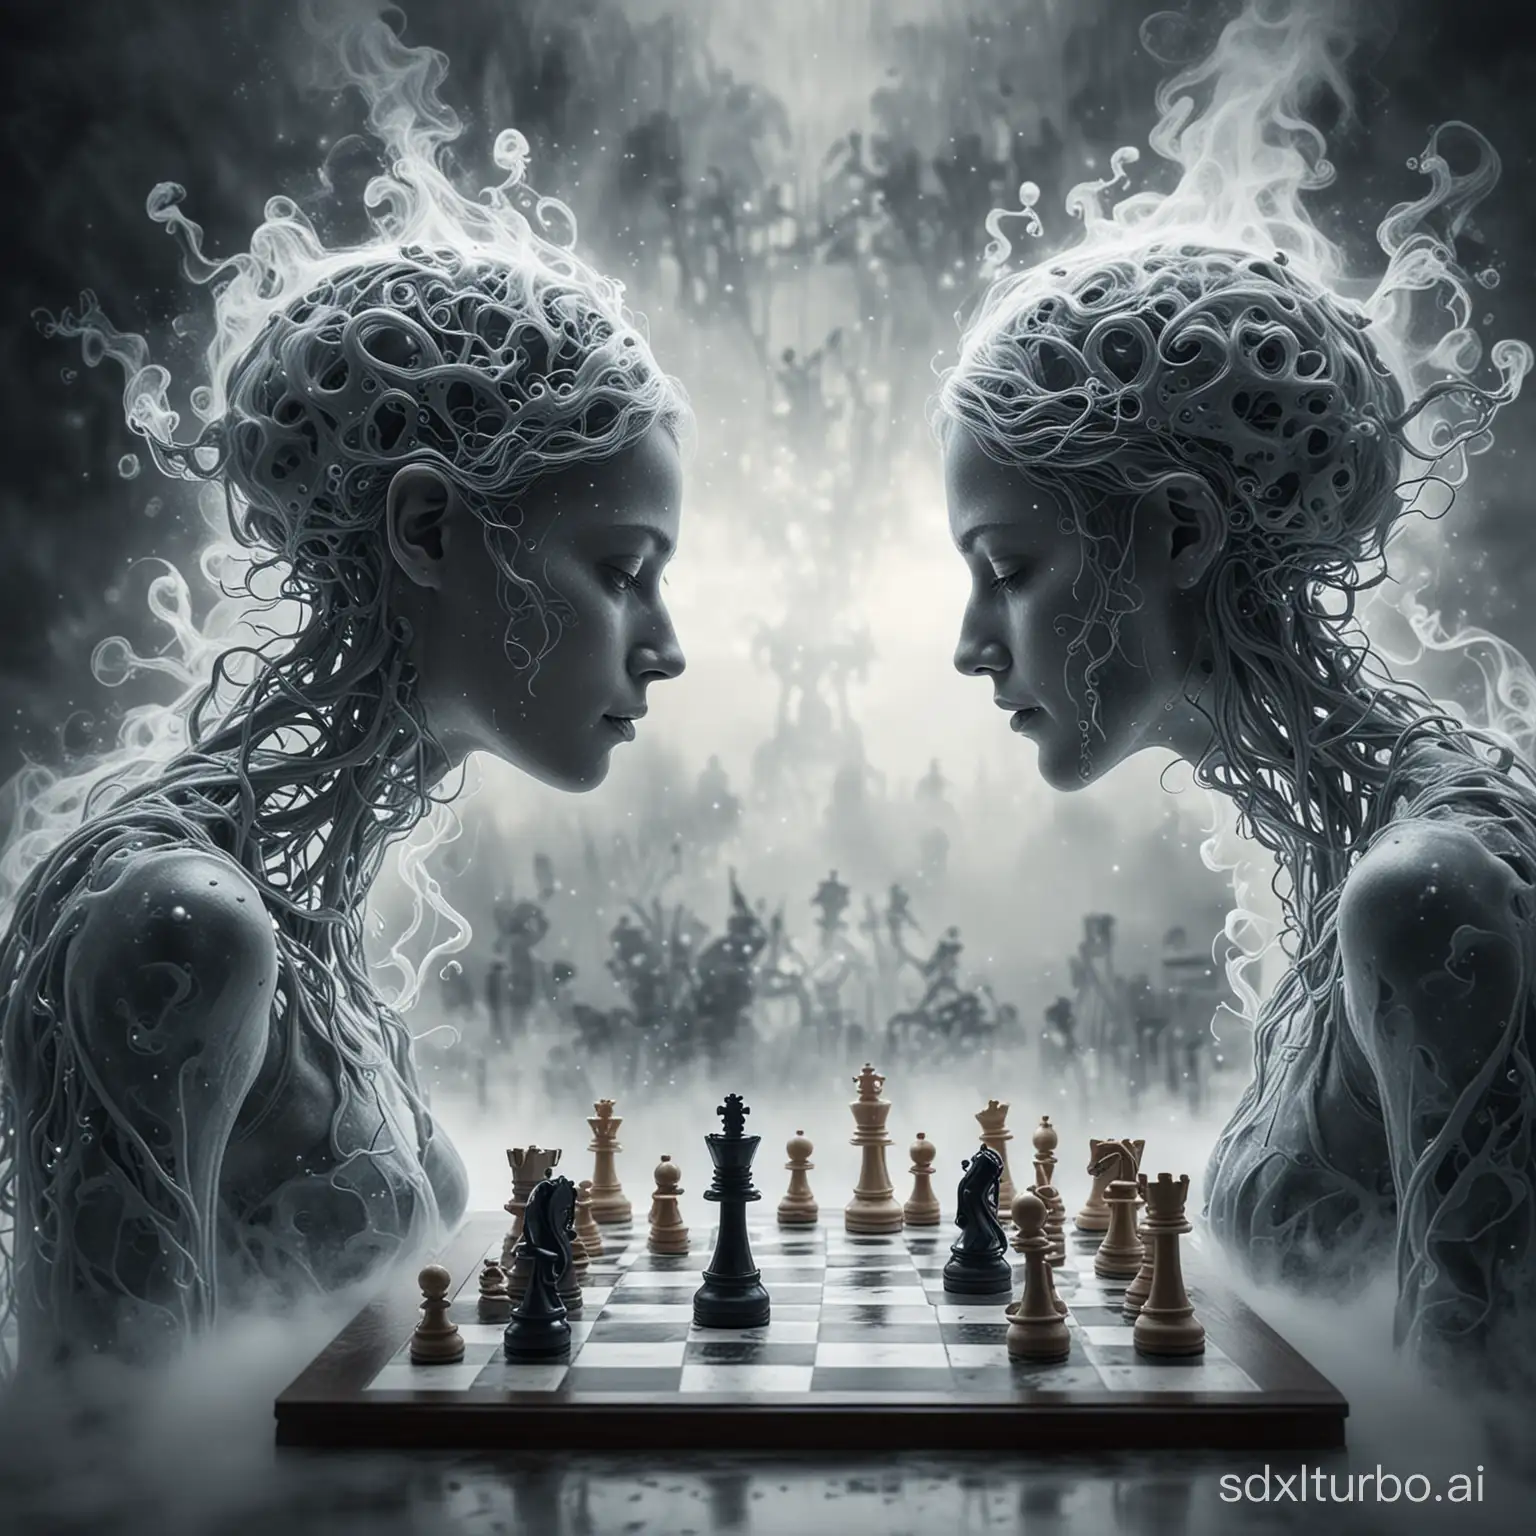 Surreal-Chess-Game-Woman-Engages-in-Strategic-Battle-with-Swirling-Mist-Figures